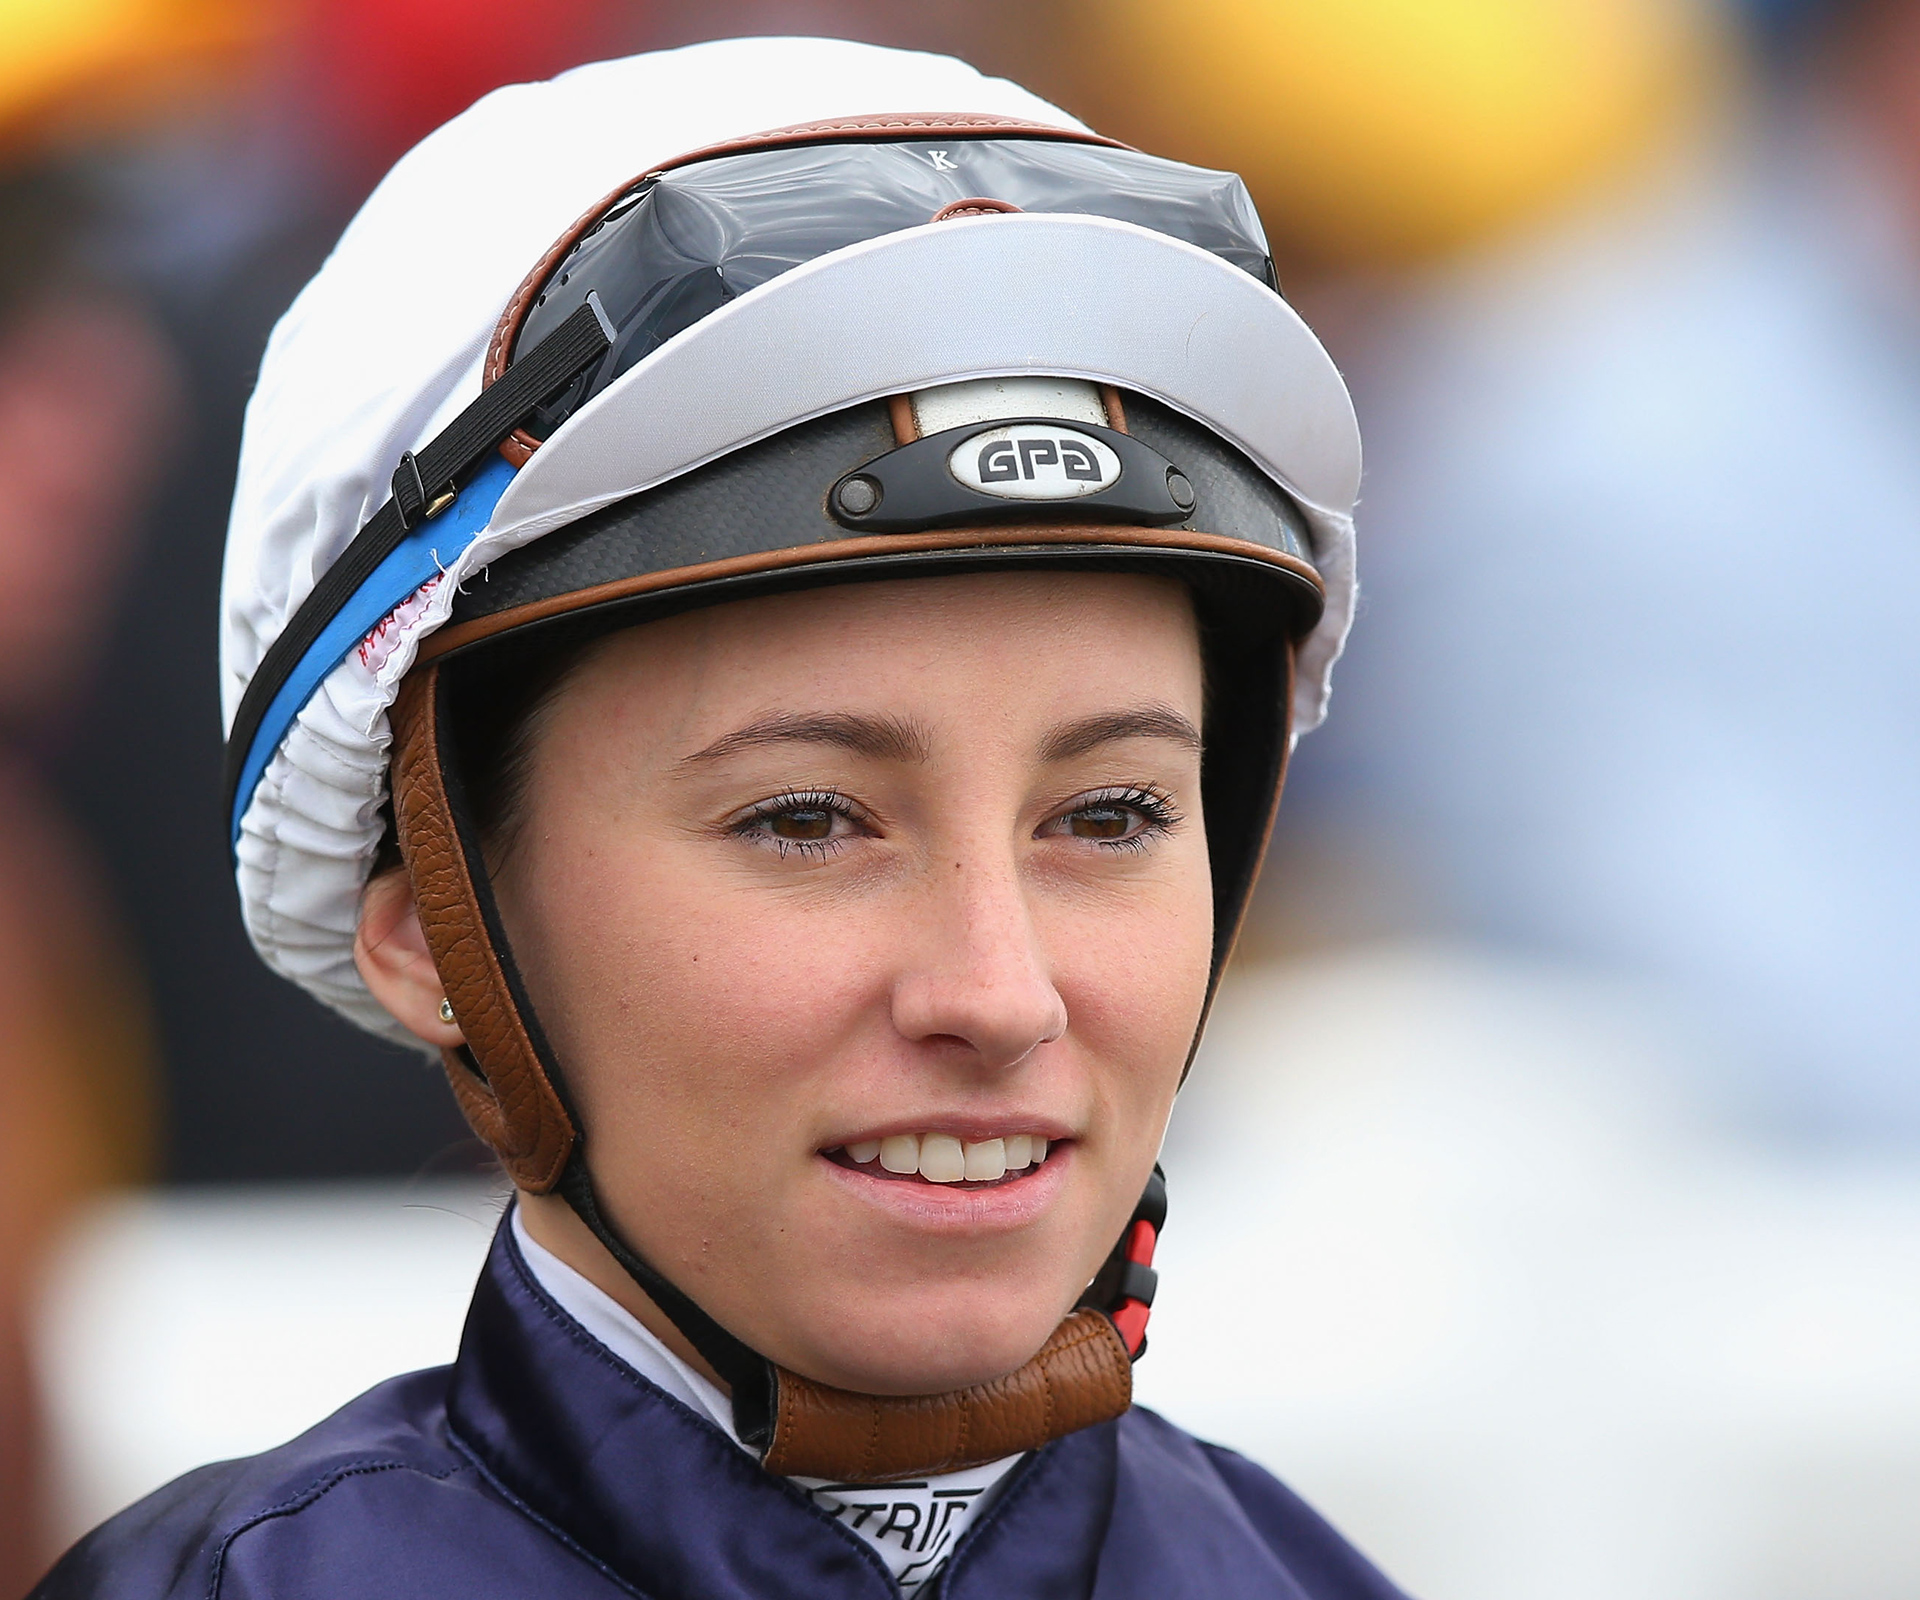 Meet the only female jockey in this year’s Melbourne Cup race